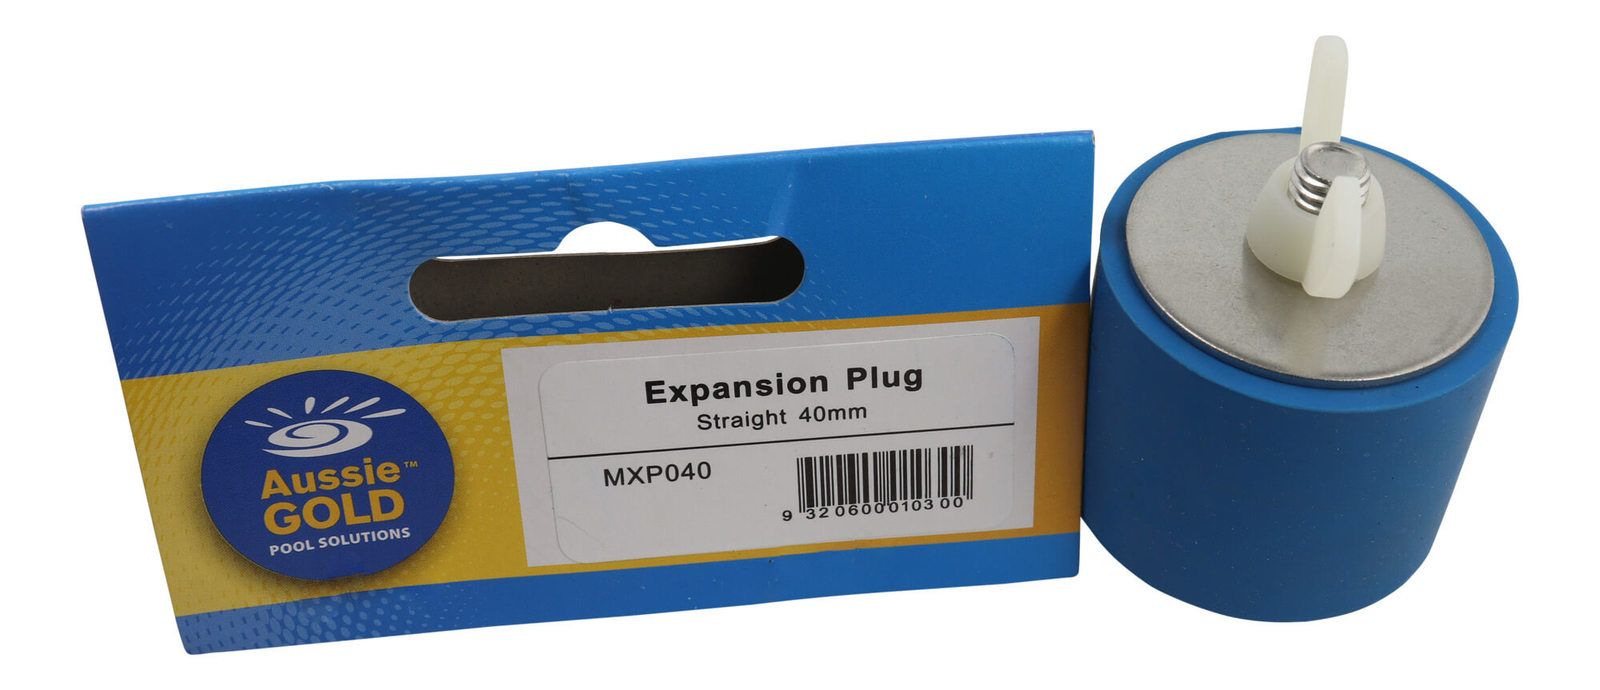 Expansion Plug 40mm Straight Rubber Expansion Plug For Pool Pipework